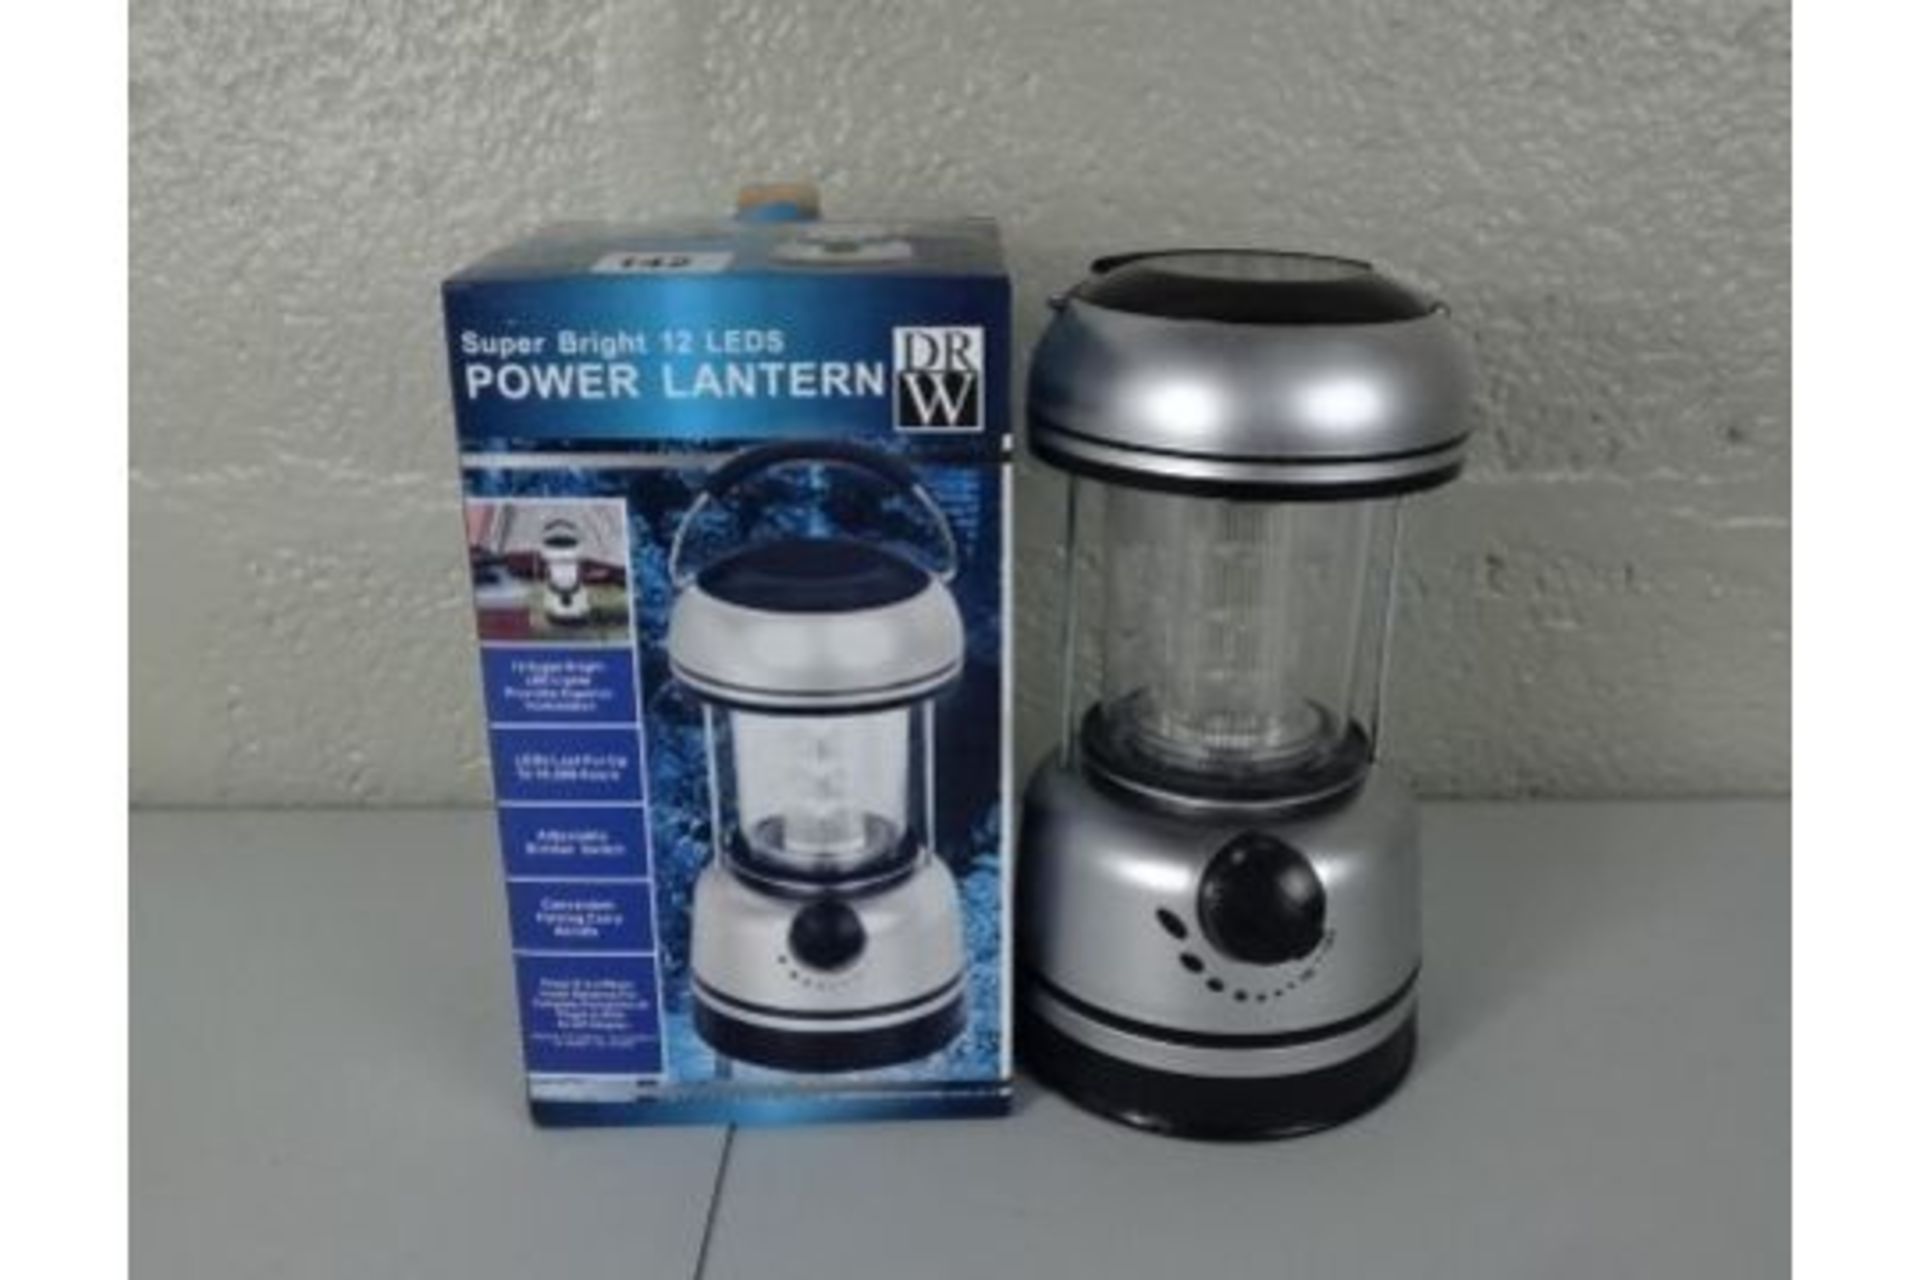 Super Bright 12 LED Power Lantern (Batteries Not Included